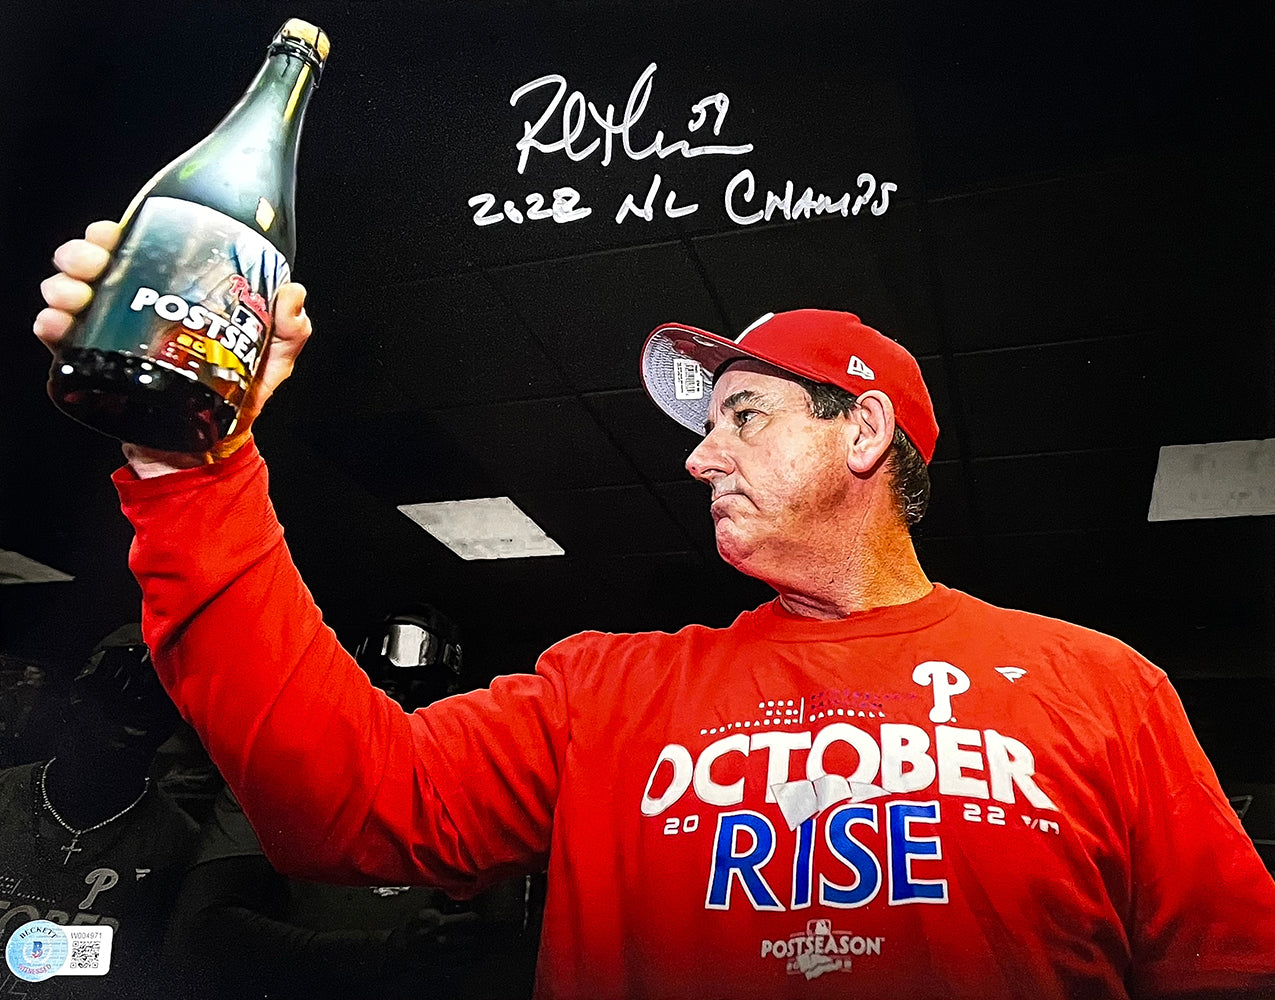 Rob Thomson Signed 11x14 Phillies Champagne Photo 22 NL Champs BAS